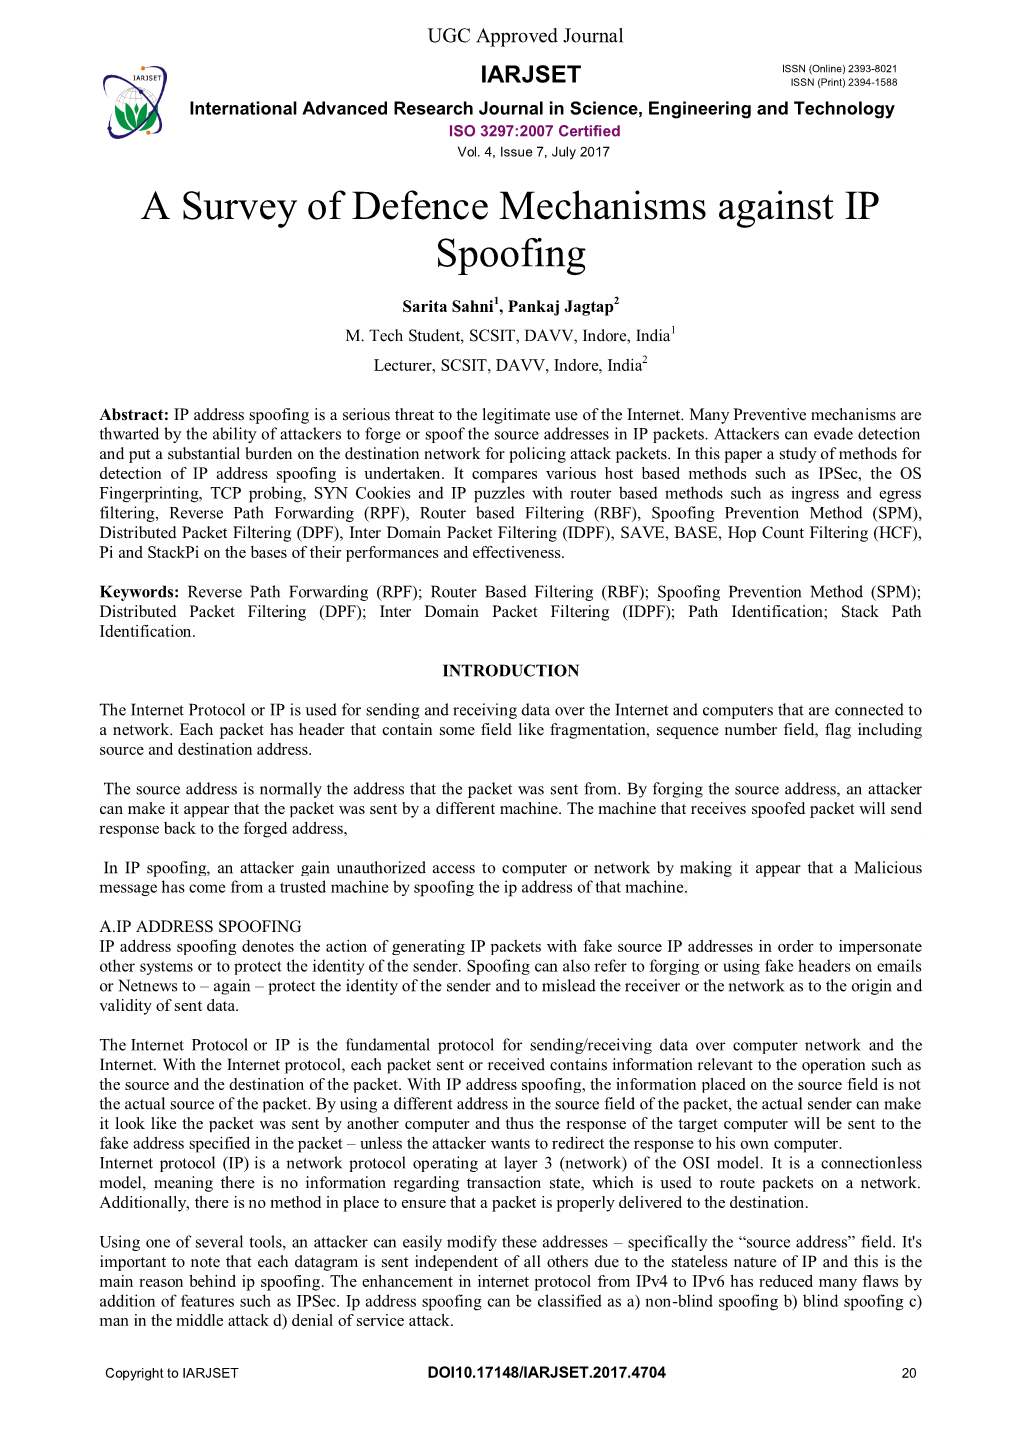 A Survey of Defence Mechanisms Against IP Spoofing